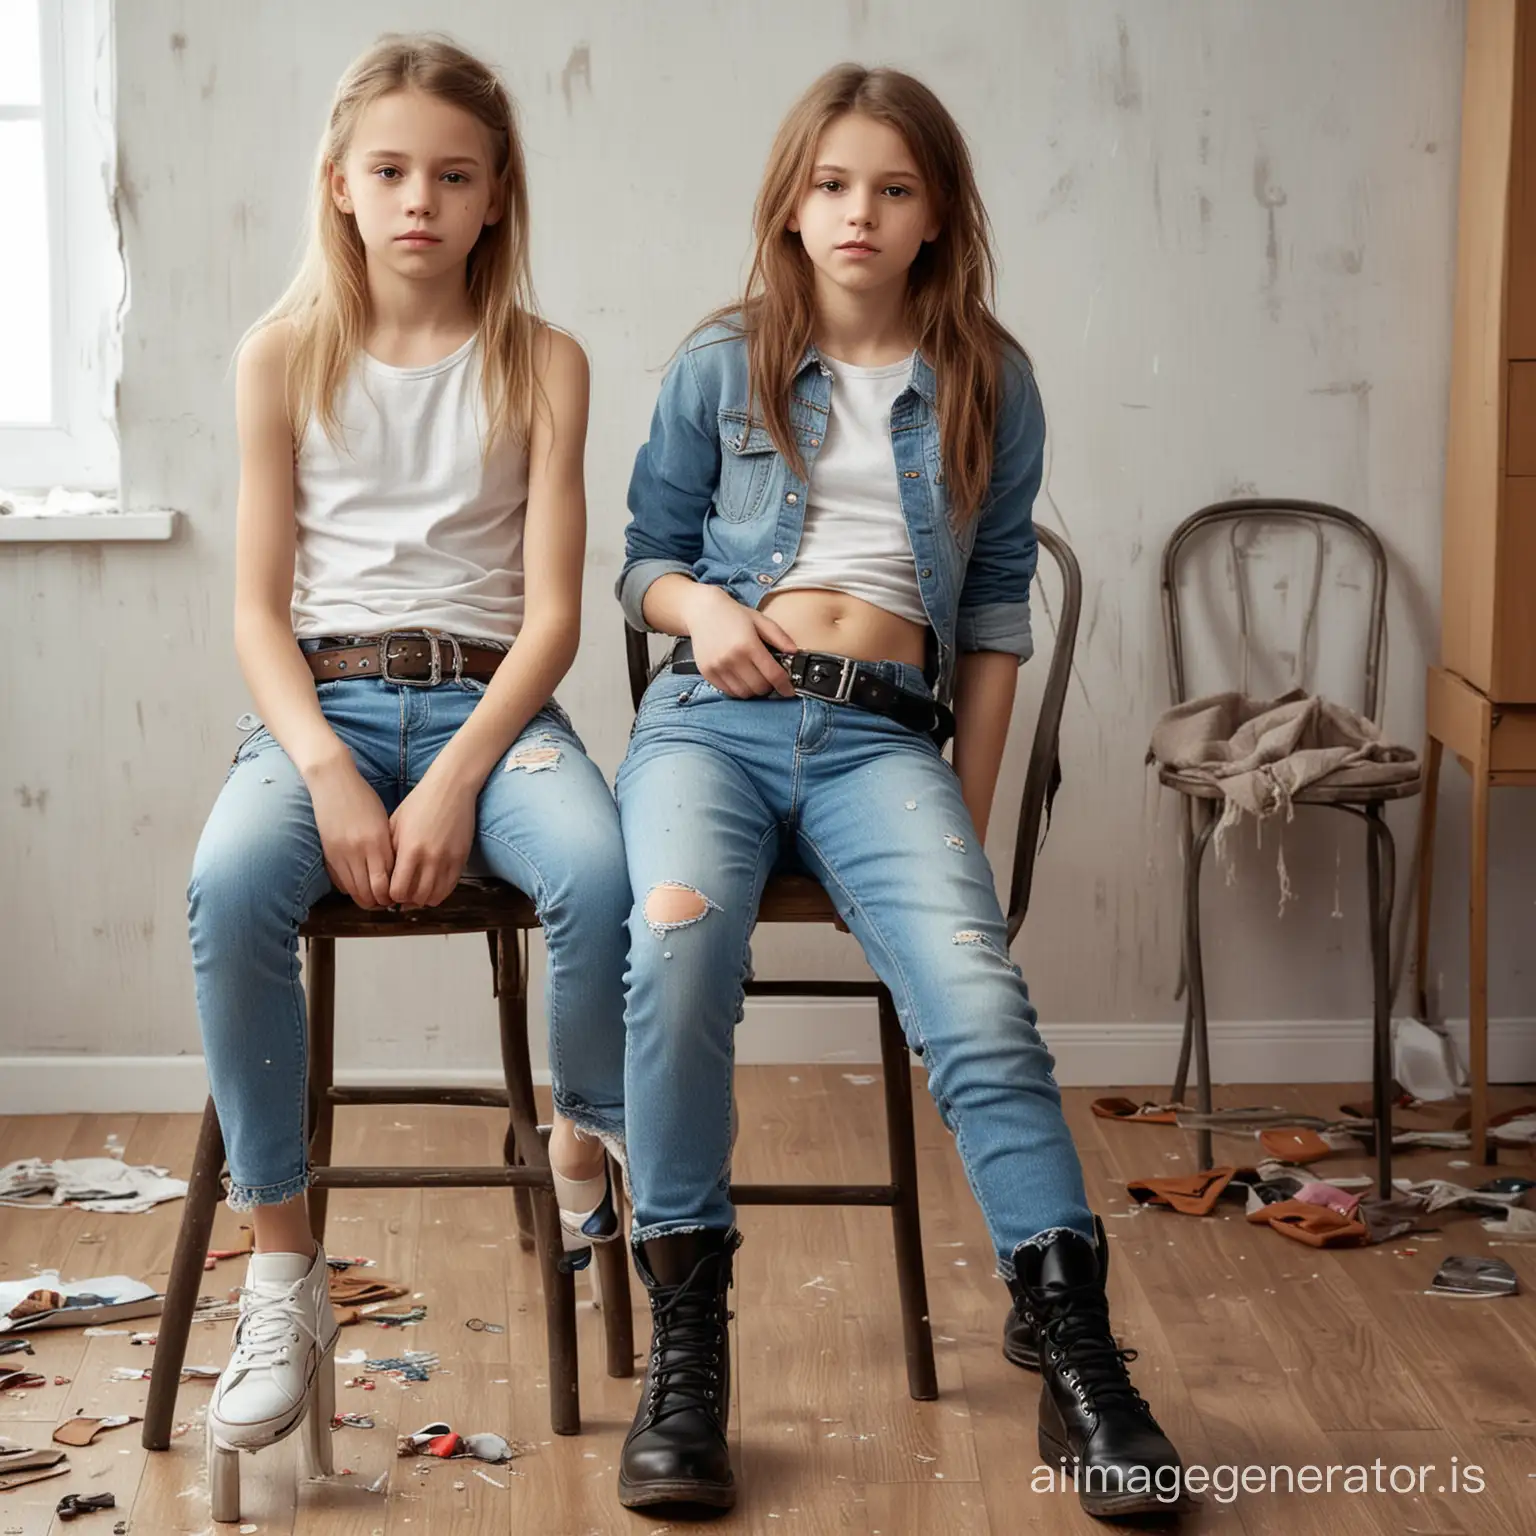 real photo of two ugly girls,13 years,sitting on a chair,skinny jeans with belt,stern face,messy children's room,Extremely Realistic,skin features